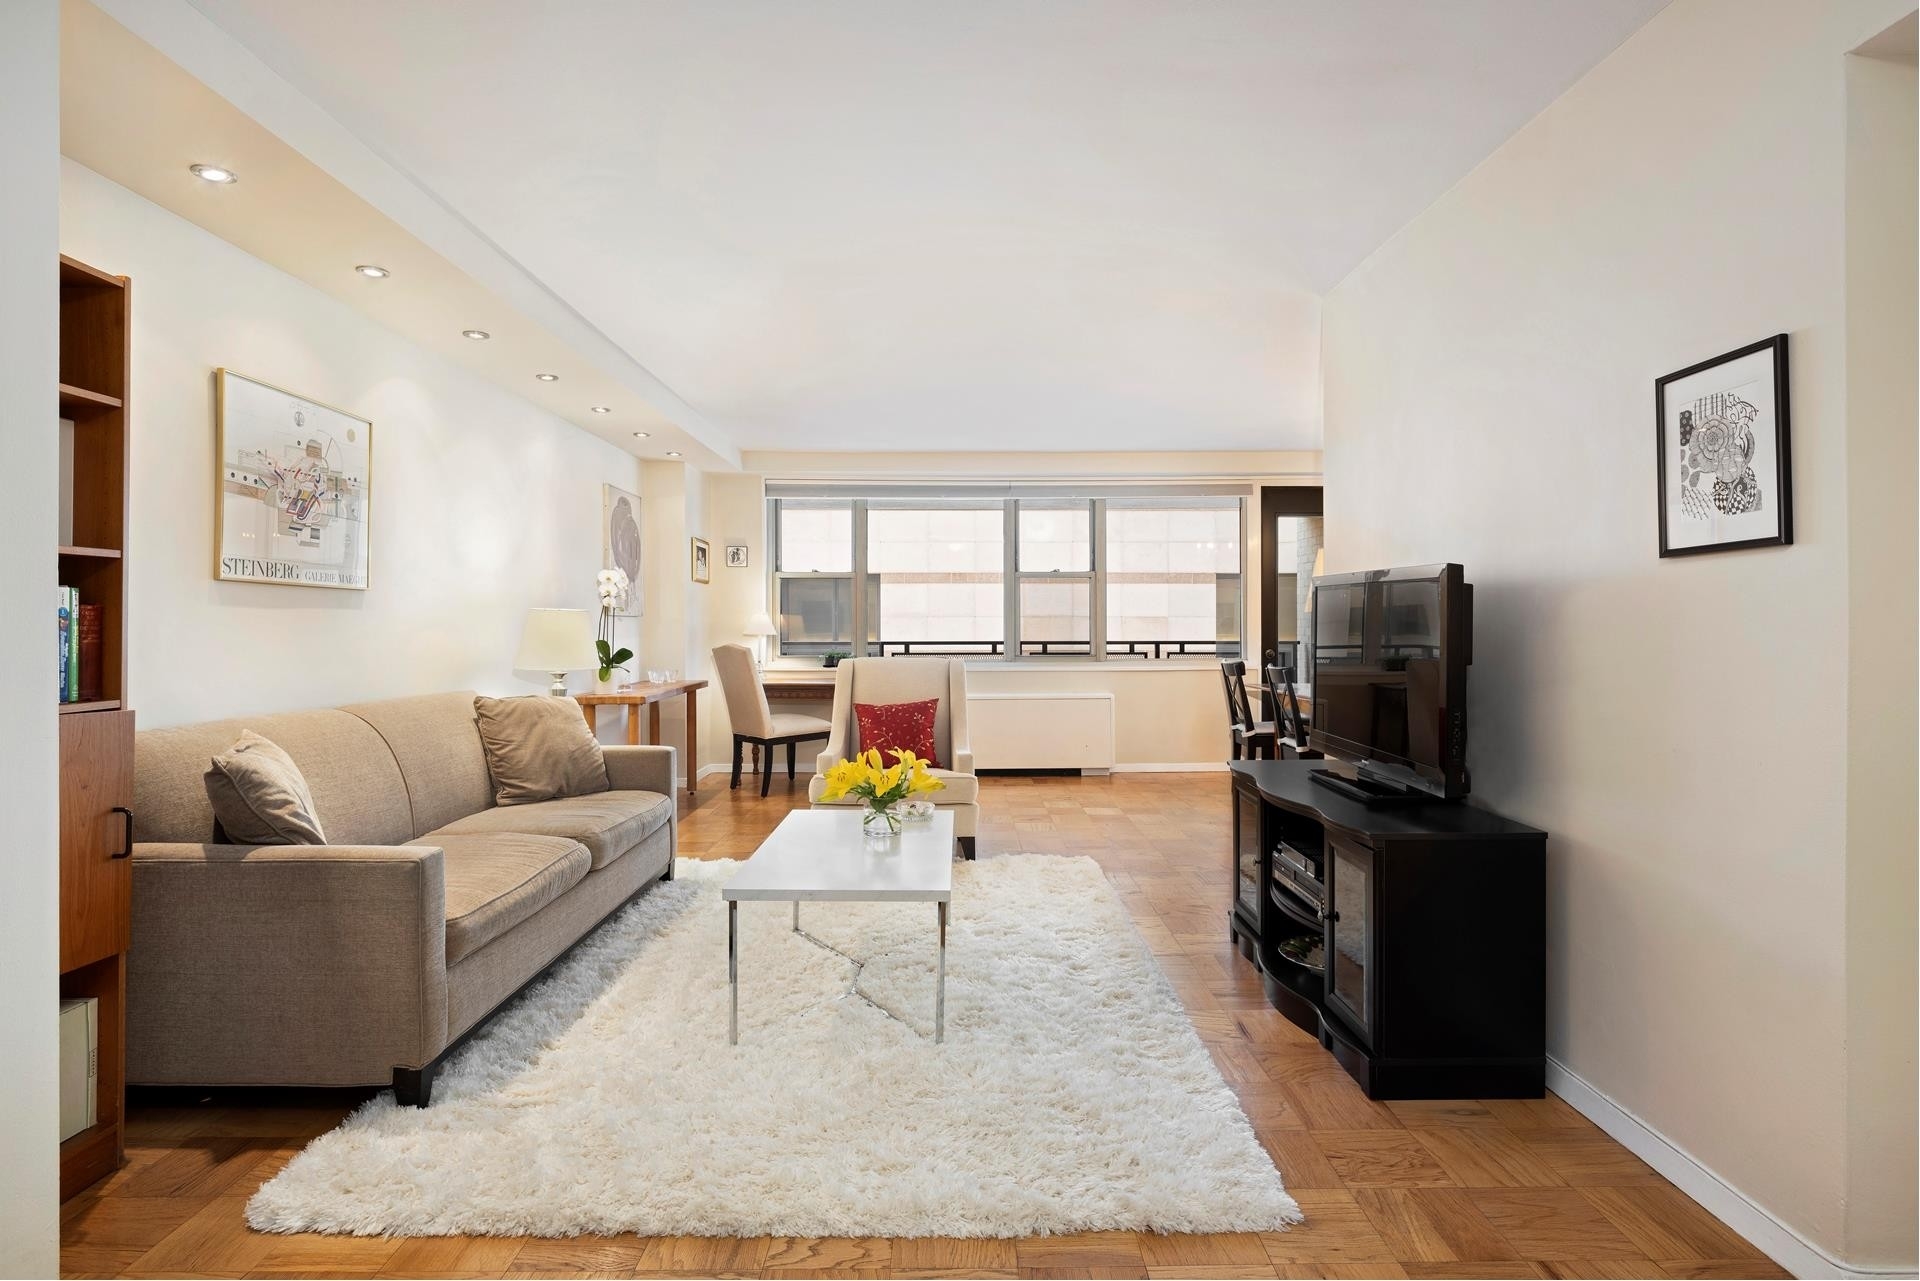 Co-op Properties for Sale at Lincoln Terrace, 165 W 66TH ST, 11A Lincoln Square, New York, NY 10023